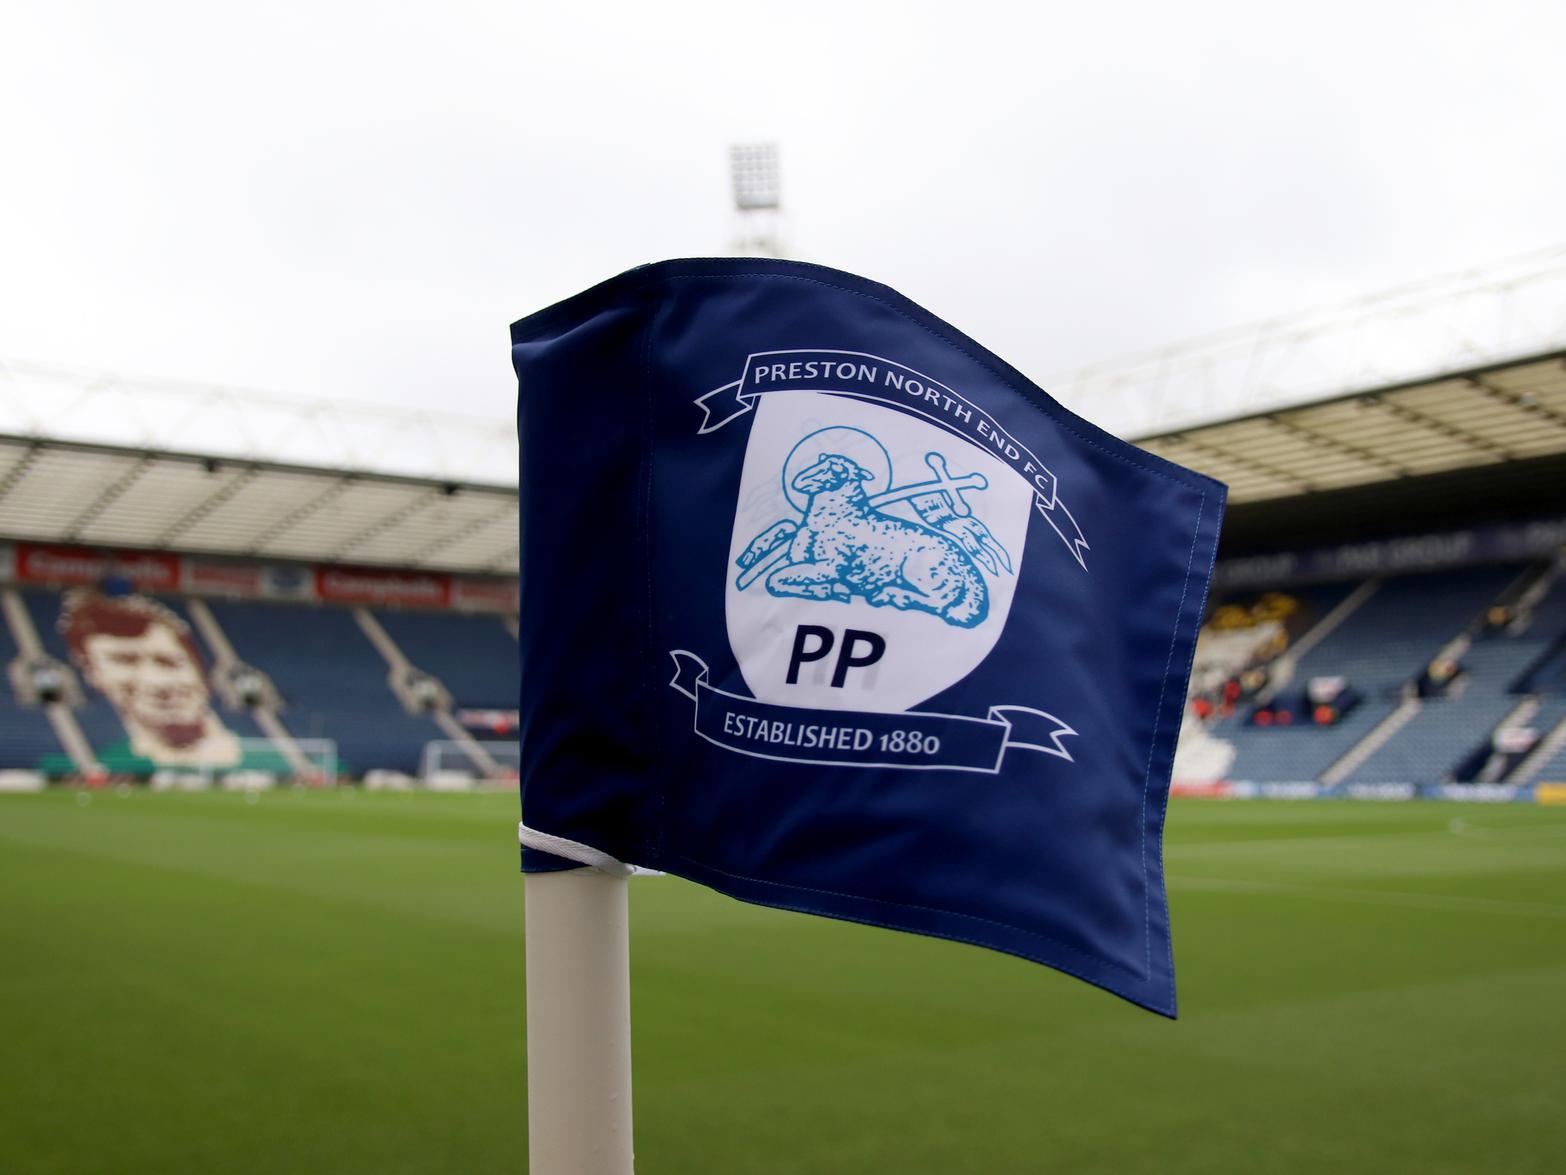 Southampton are said to have no interest in snatching Preston North End's head of recruitment Joe Savage as their new director of football, following a previous report suggesting they were keen. (Daily Echo)